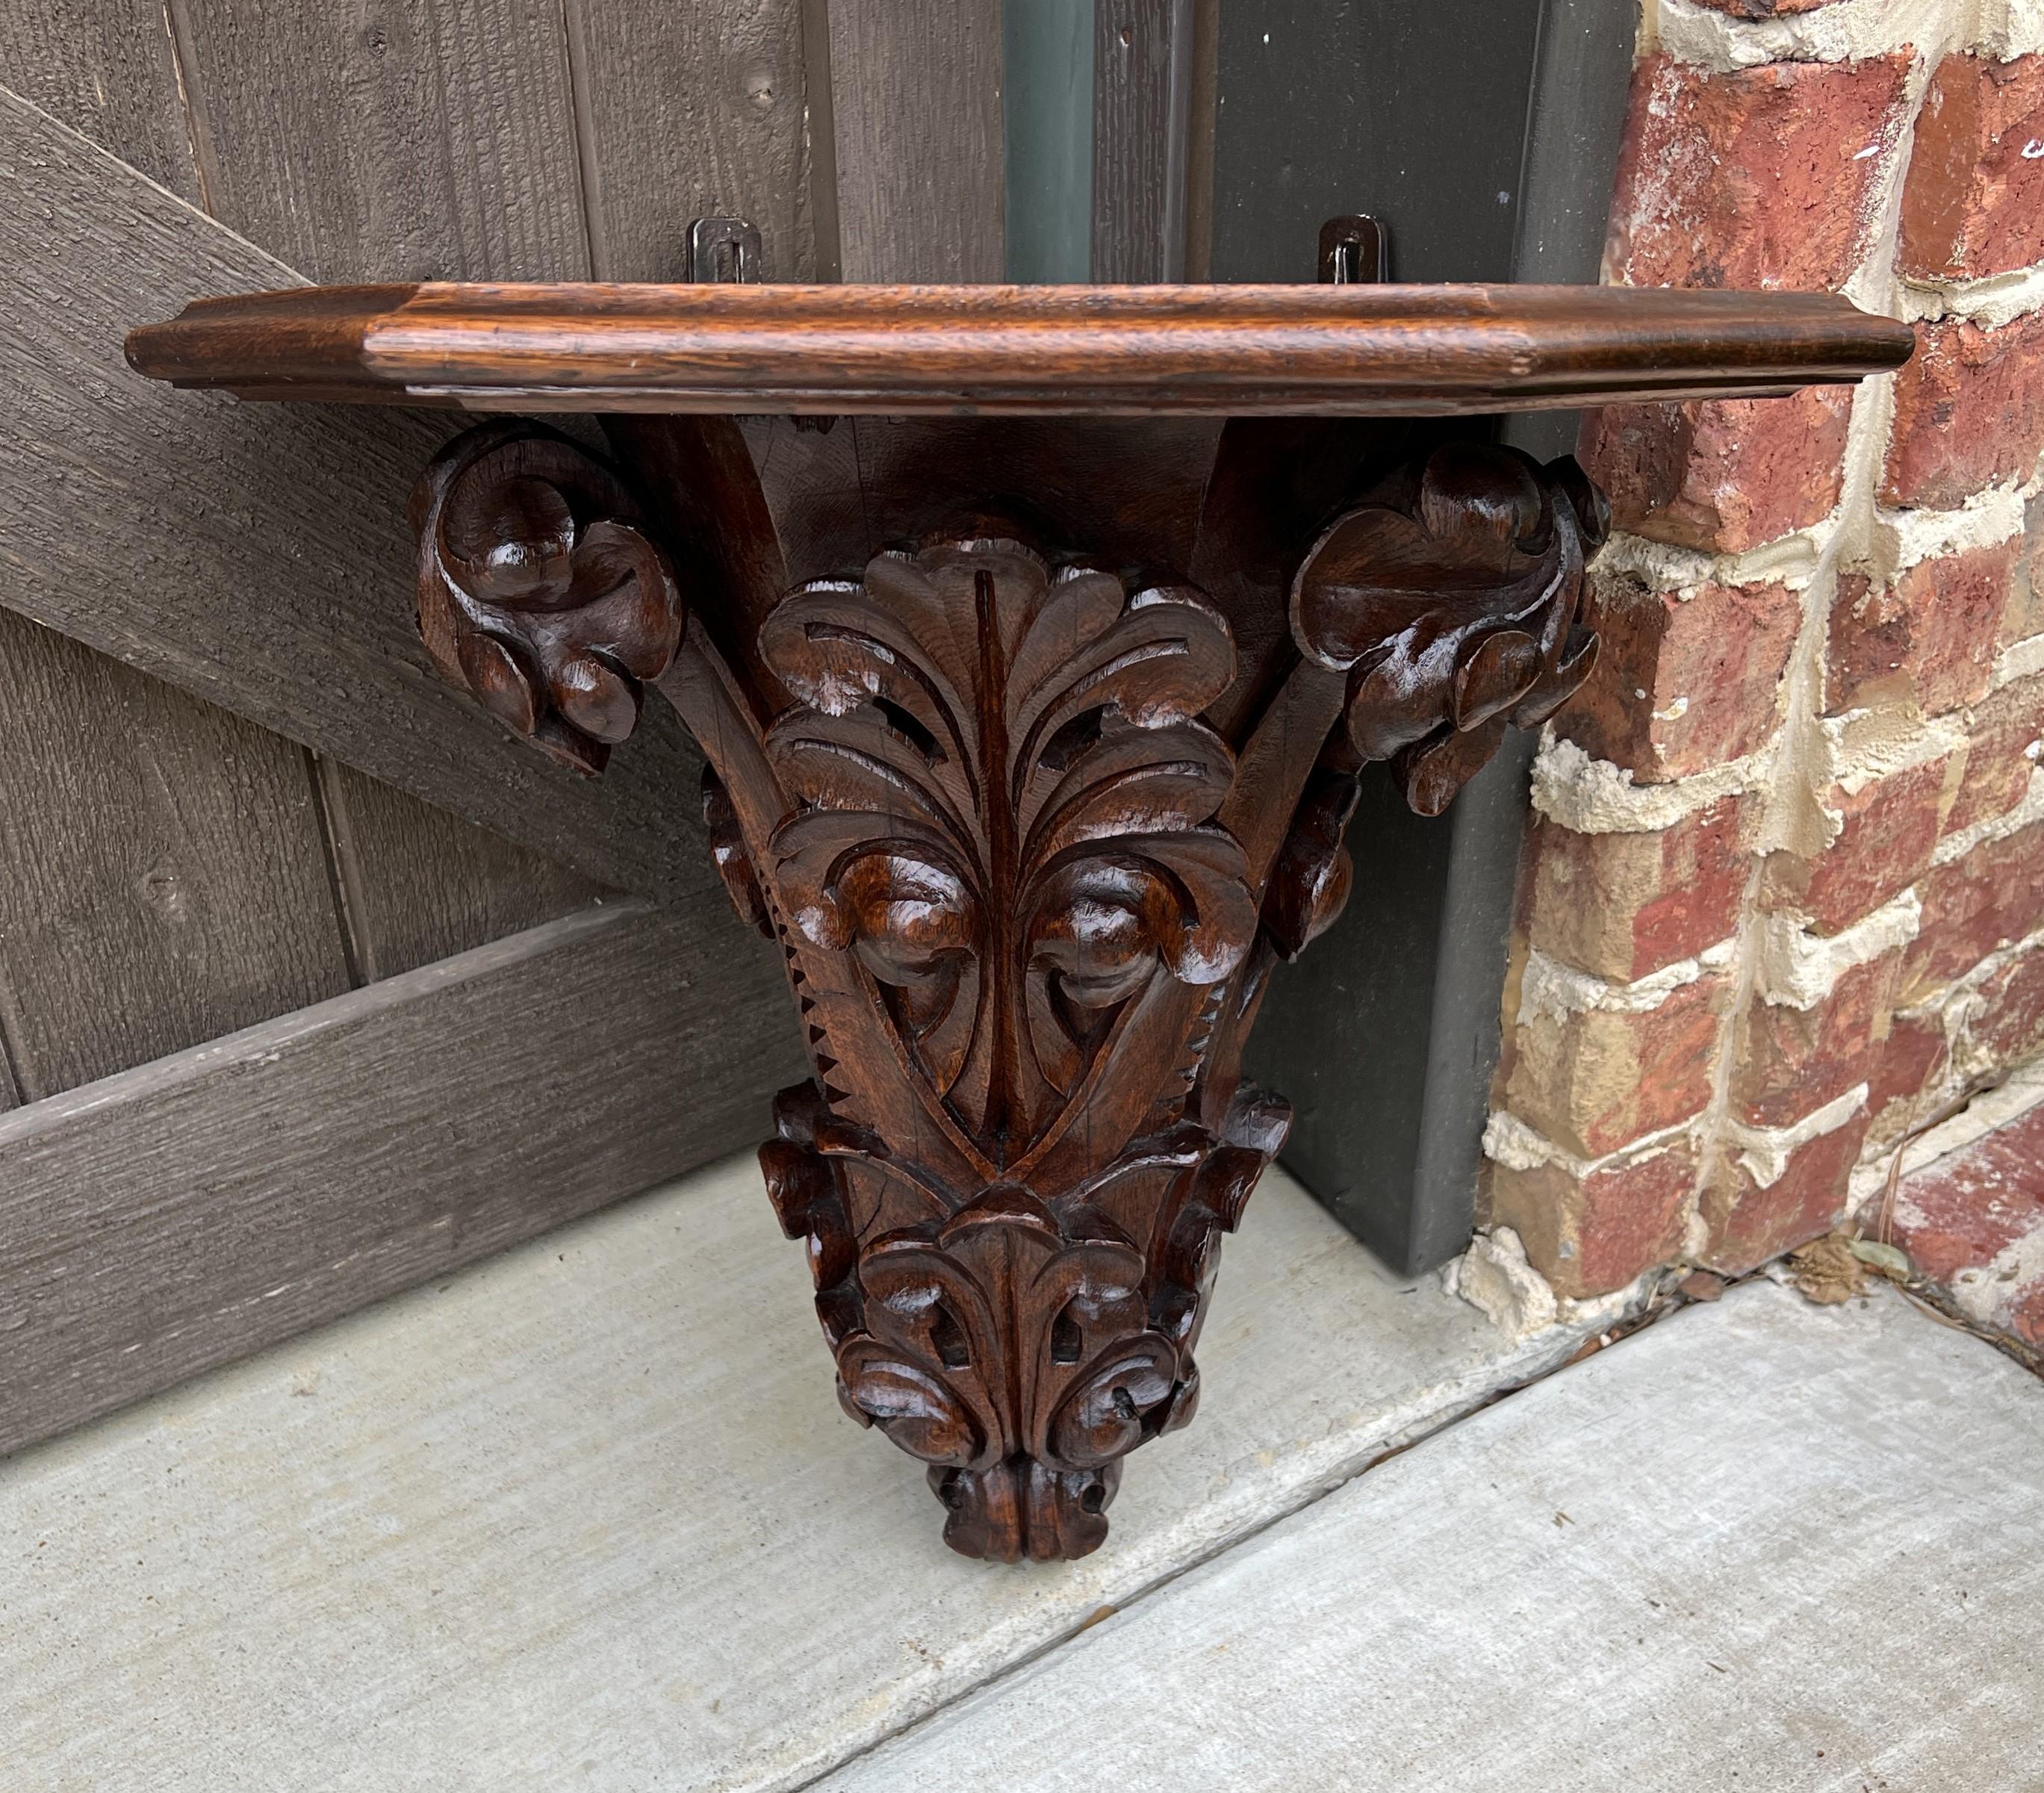 EXQUISTE Antique French Oak Corner Corbel Hanging Wall Shelf or display Pedestal~~circa 1880s

Fabulous French flourish accents with canted corners and beveled edge top~~beautiful oak patina~~cast iron brackets for hanging

 The perfect